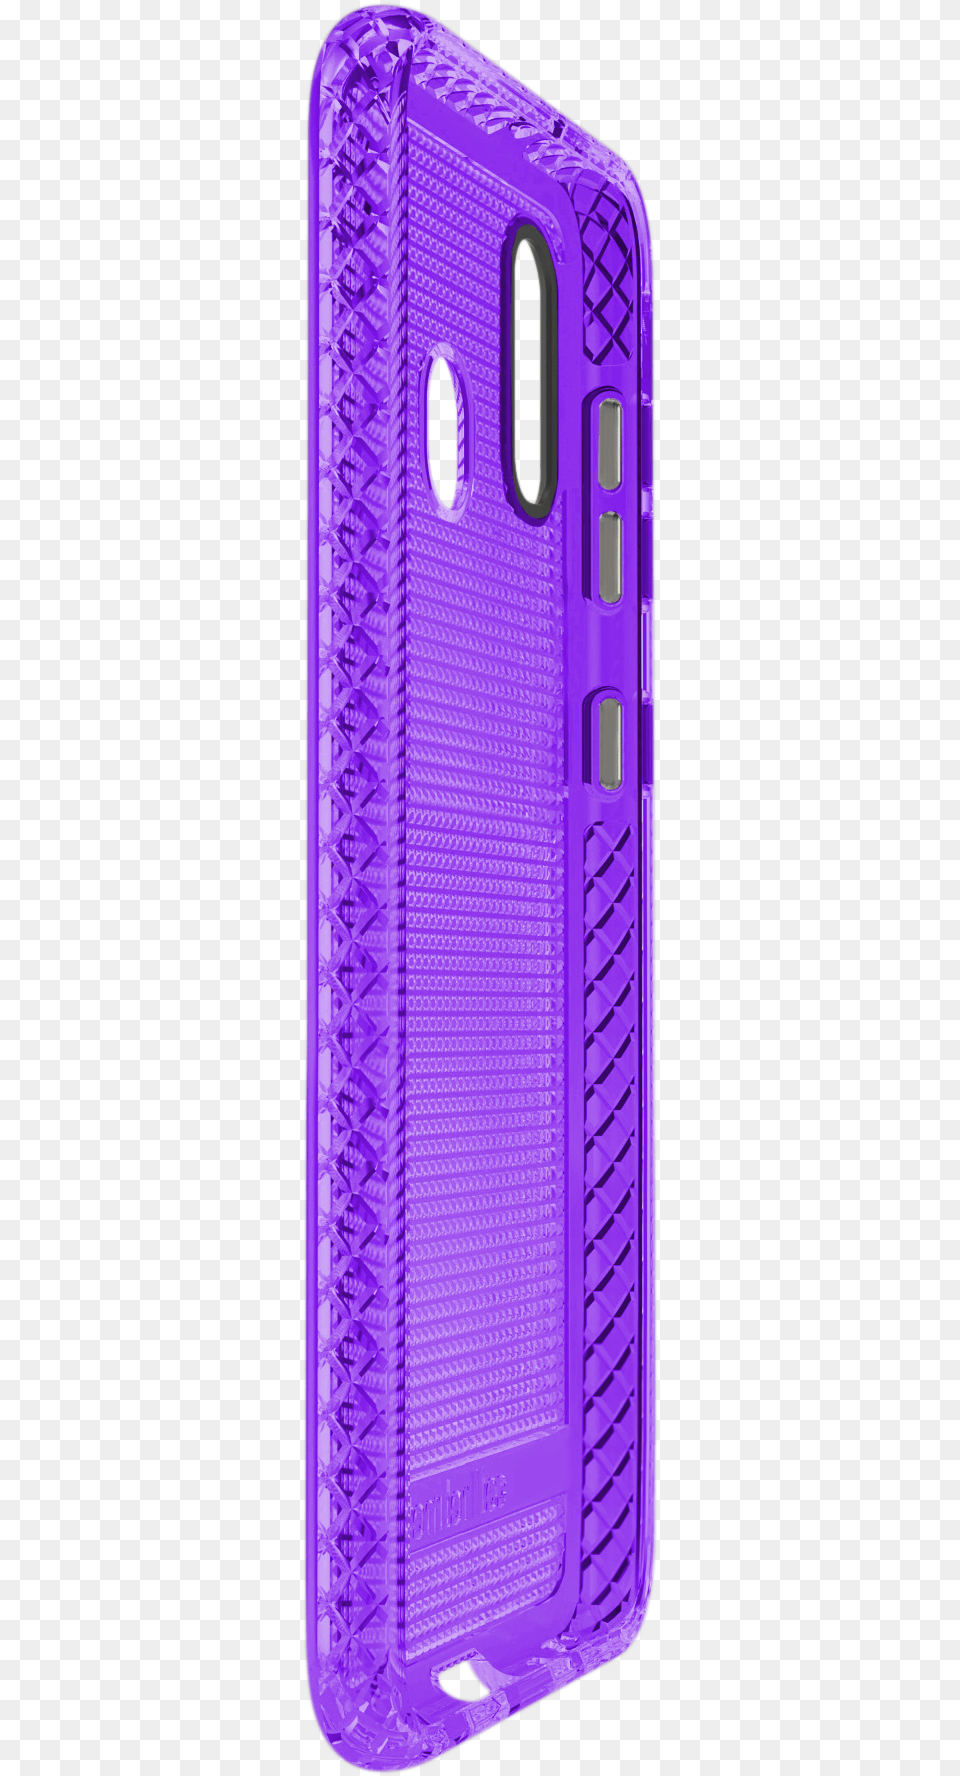 Altitude X Pro Series For Samsung Galaxy A20 Mobile Phone Case, Electronics, Mobile Phone, Purple Free Png Download